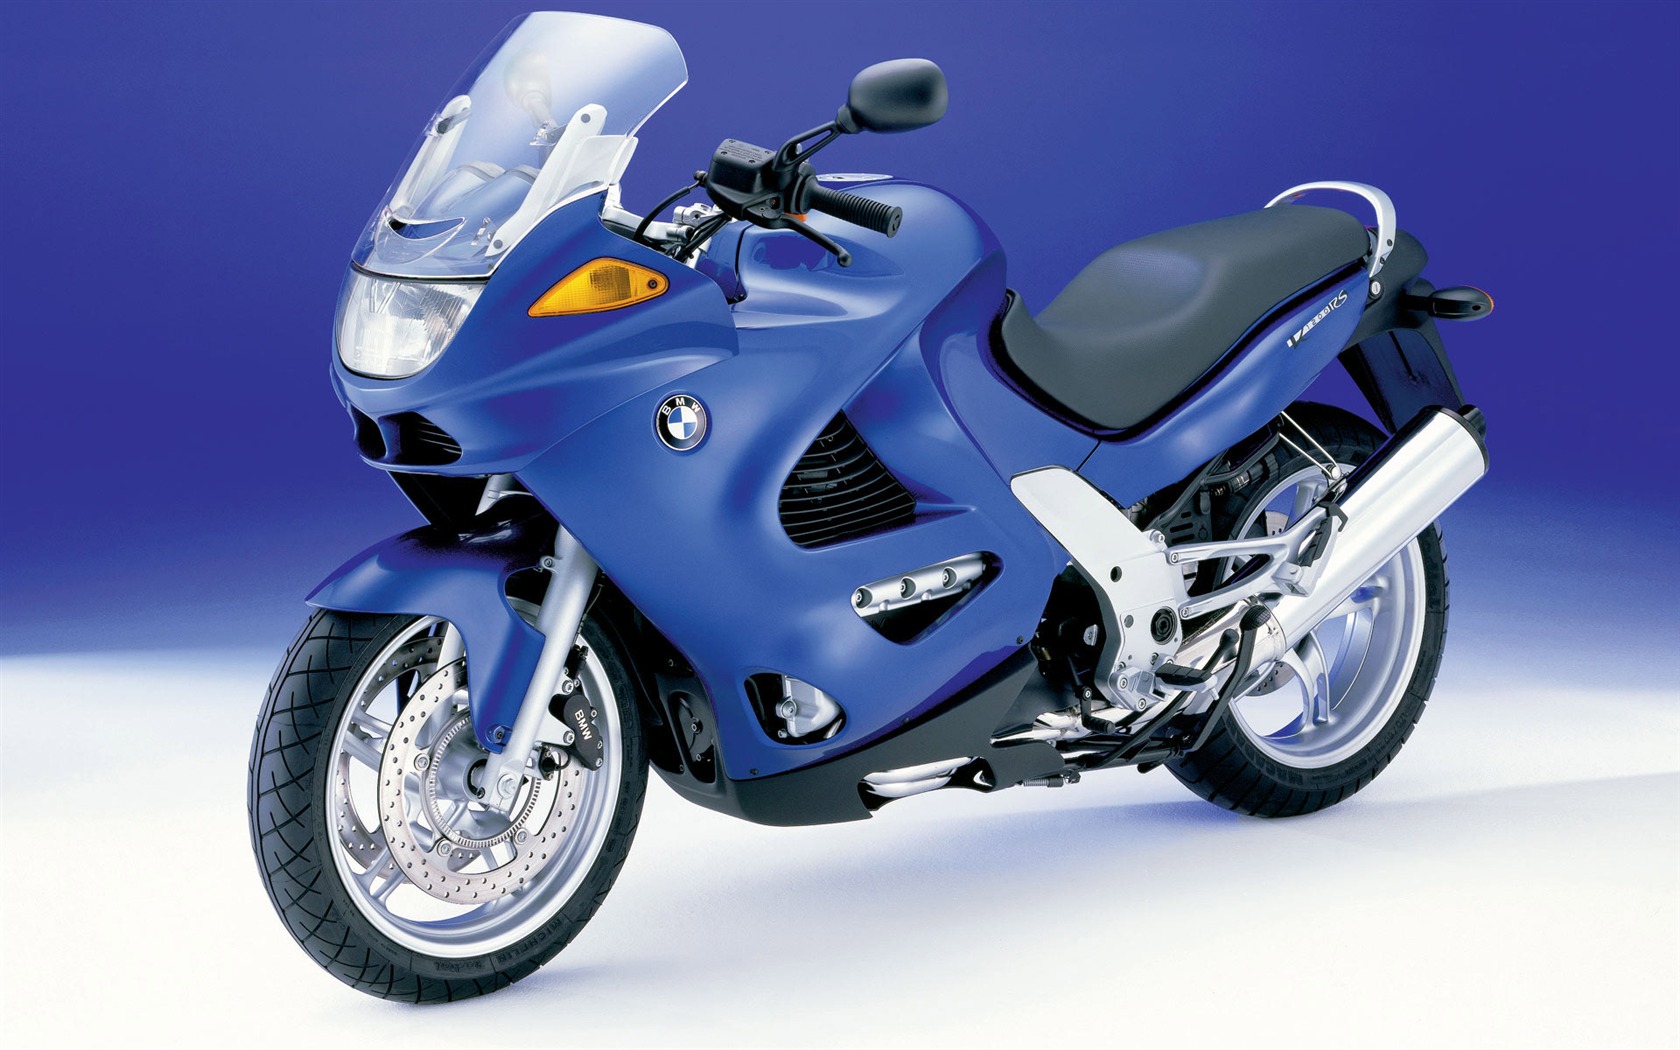 BMW motorcycle wallpapers (1) #2 - 1680x1050